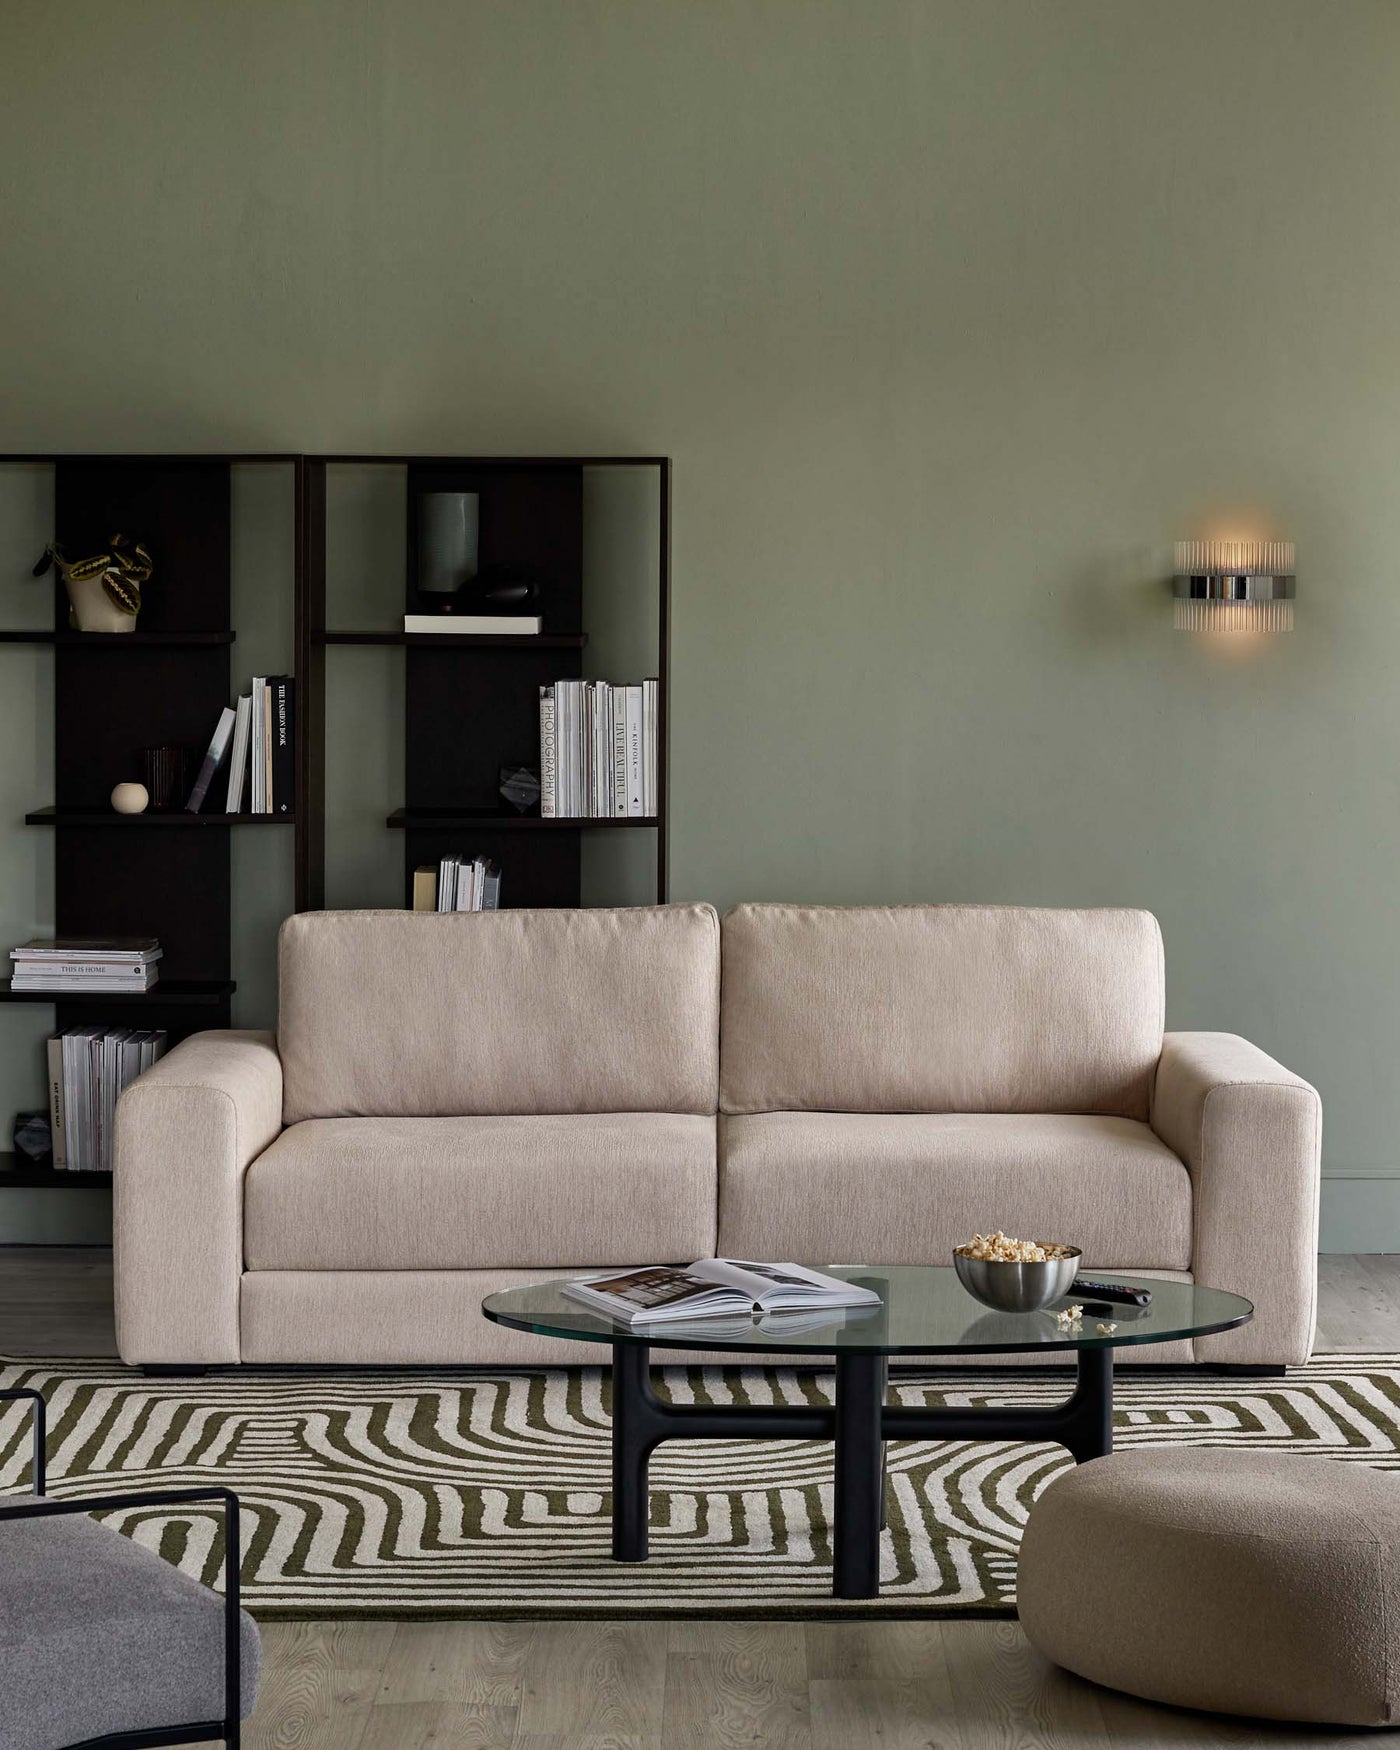 A contemporary, beige upholstered three-seater sofa with a minimalist silhouette and rounded armrests. In front of the sofa is an oval glass-top coffee table with a black frame, resting on a patterned area rug. To the left, a matching beige upholstered ottoman complements the seating. On the background wall is a dark-toned open bookshelf filled with assorted books and decorative items.